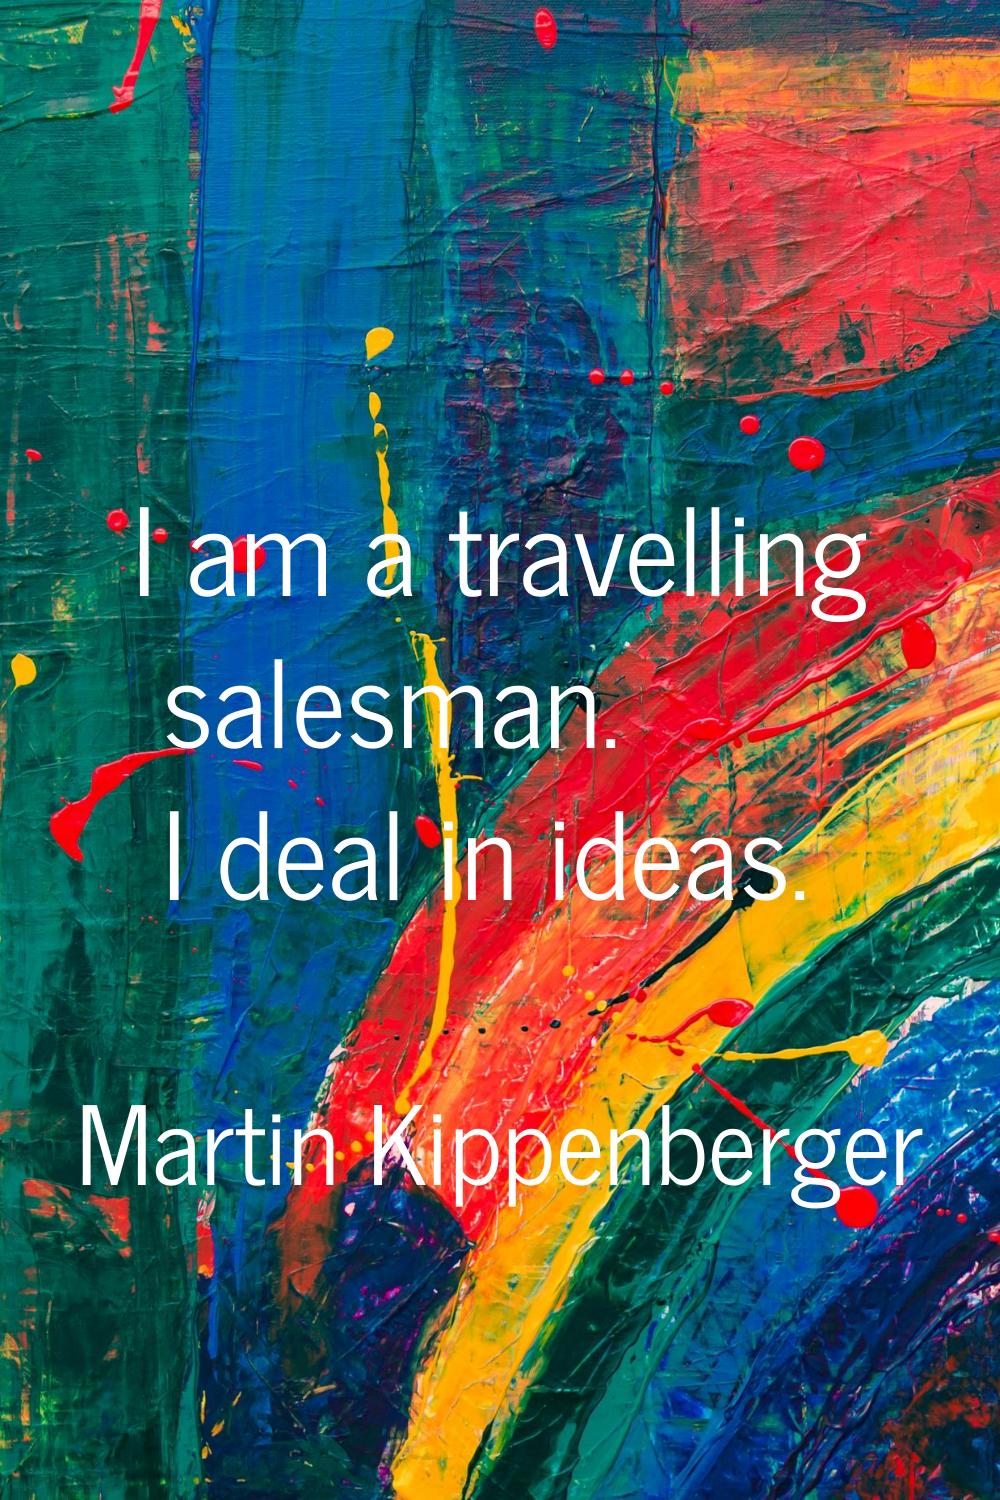 I am a travelling salesman. I deal in ideas.